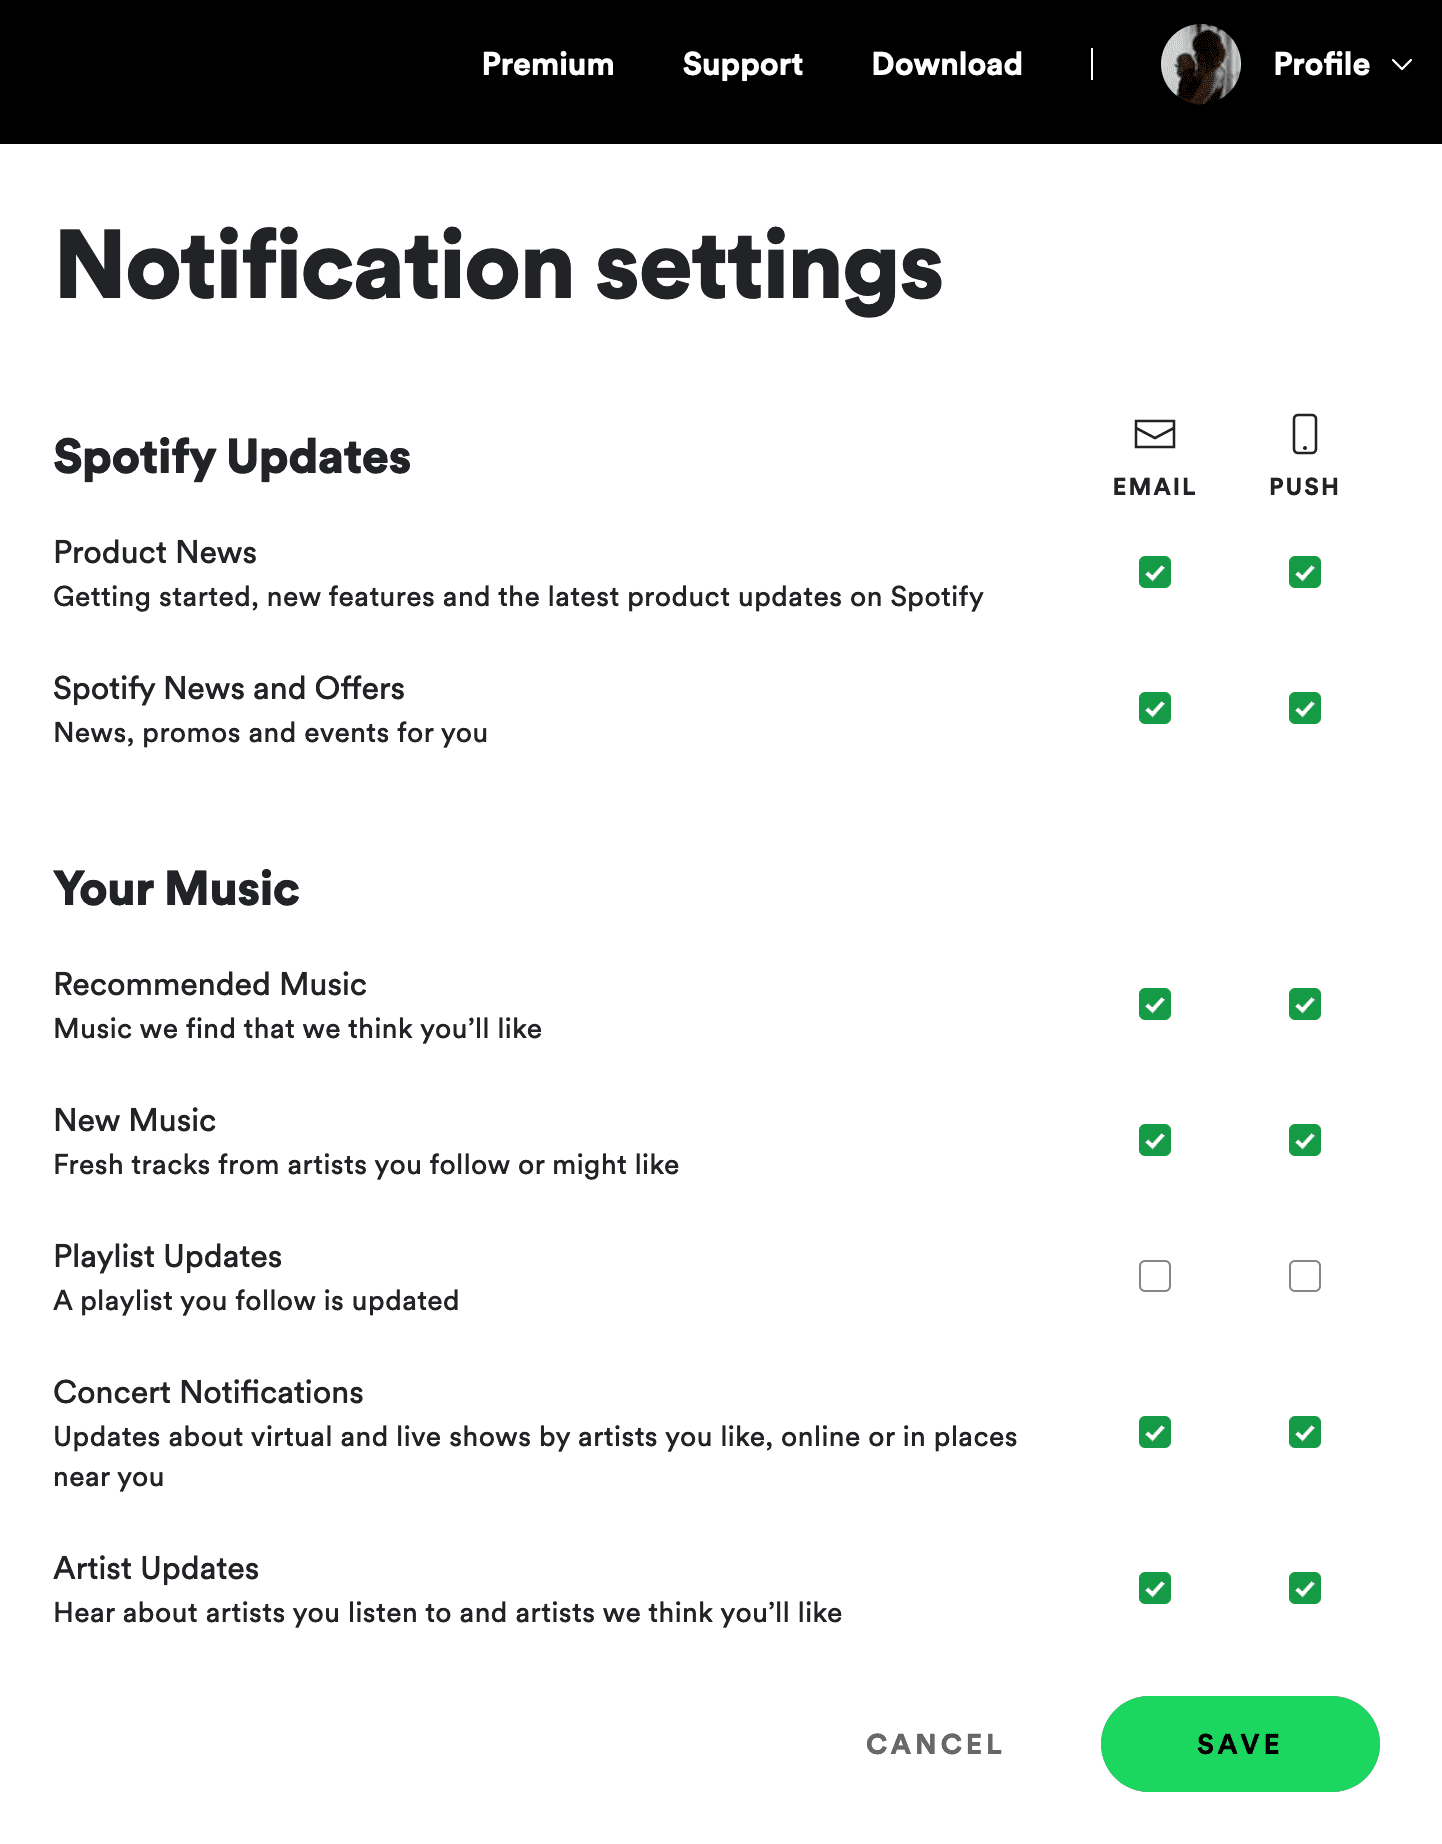 Spotify's email preference page